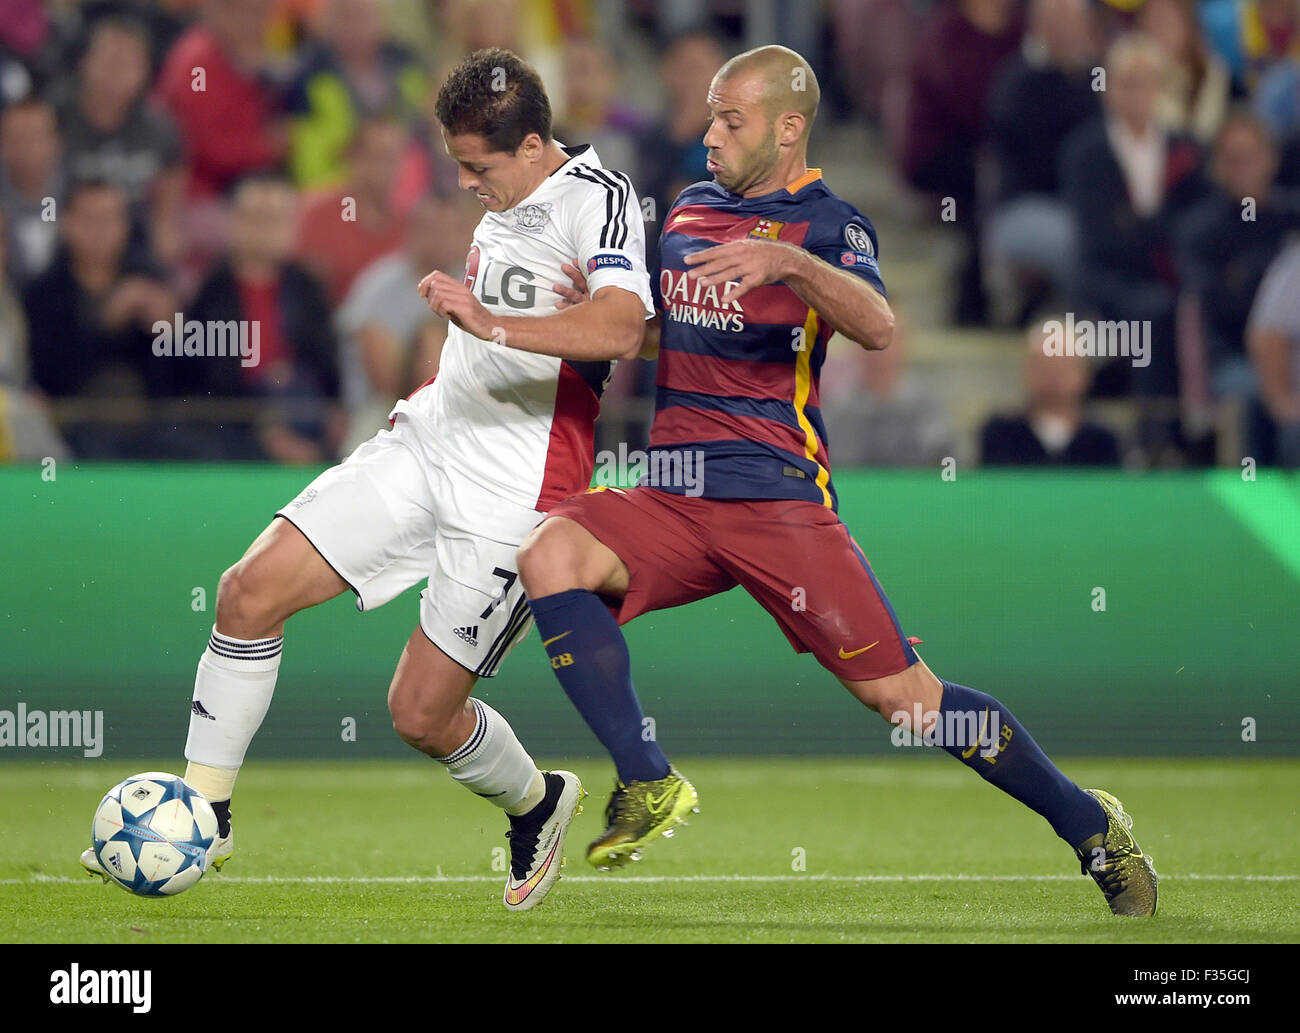 Barcelona, Spain. 29th Sep, 2015. Leverkusen?s Javier Hernández (L) and Barcelona?s Javier Mascherano vie for the ball during the UEFA Champions League Group E first leg soccer match between FC Barcelona and Bayer 04 Leverkusen at the Camp Nou in Barcelona, Spain, 29 September 2015. Photo: Federico Gambarini/dpa/Alamy Live News Stock Photo